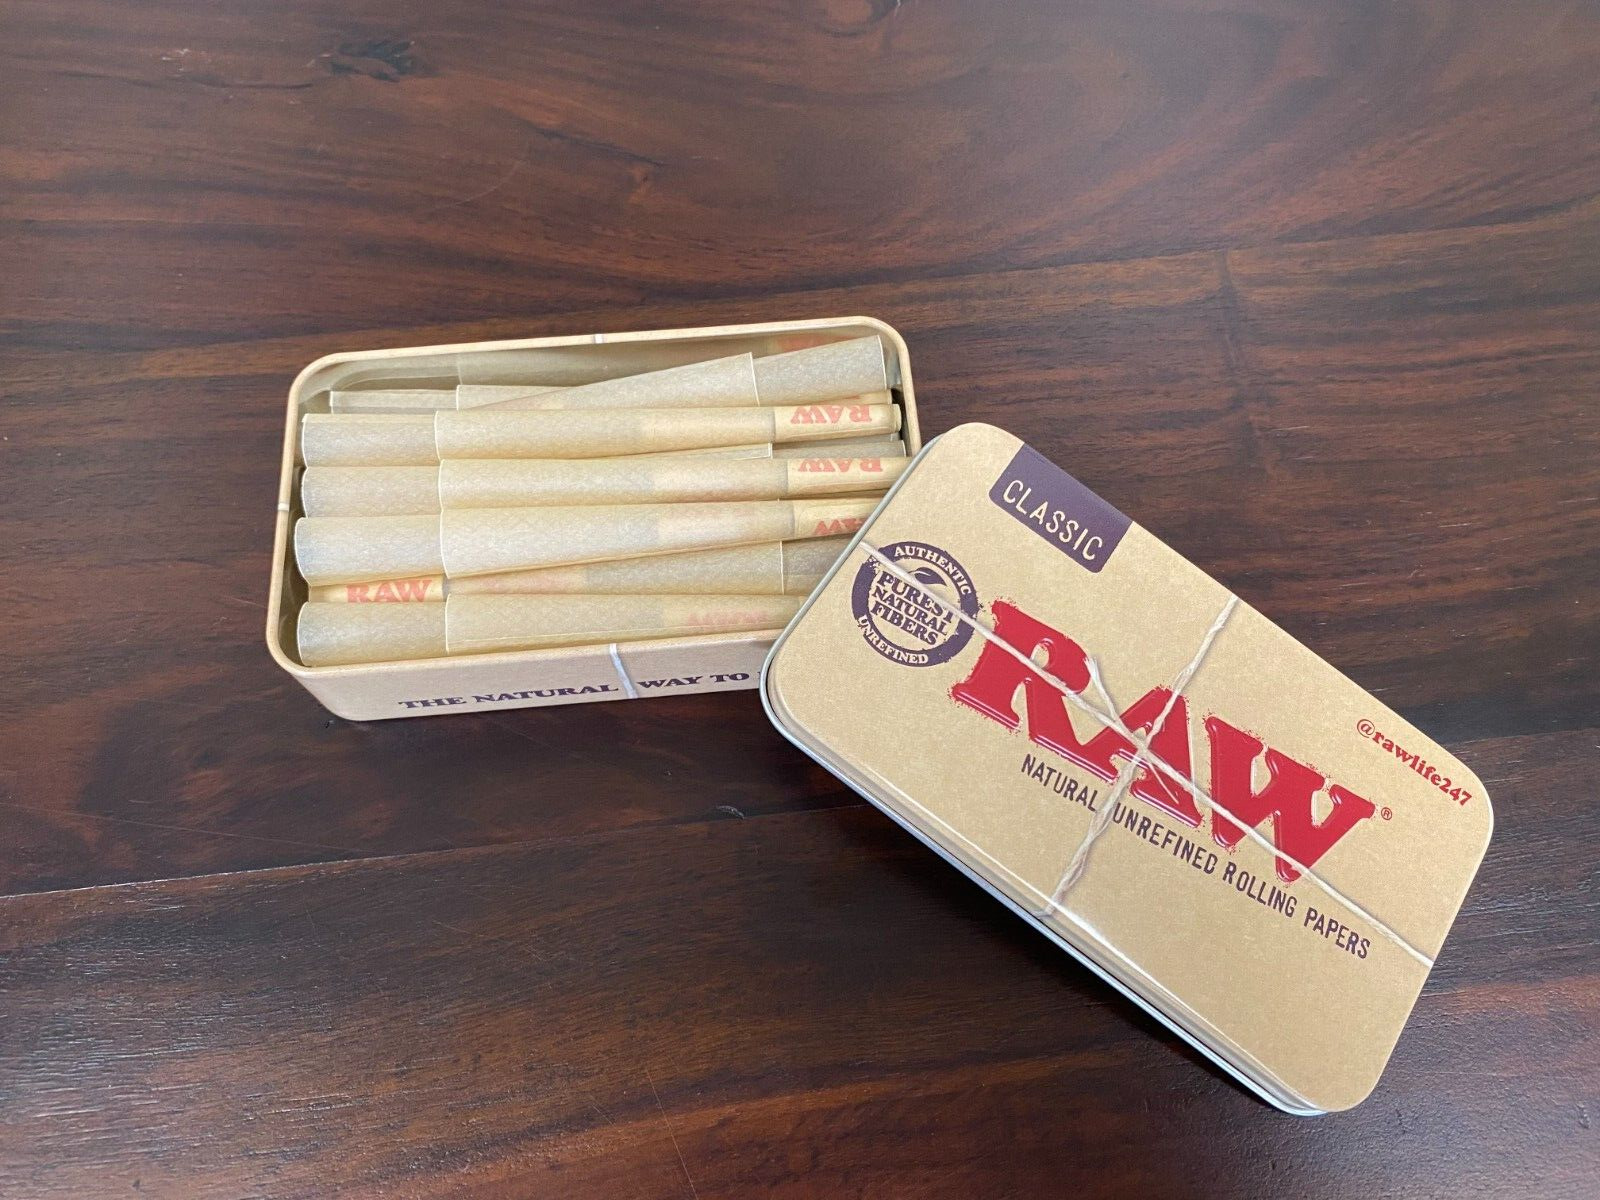 RAW CONES CLASSIC 1 1/4  SIZE 30 COUNT CIGARETTE PAPERS~RAW STORAGE TIN. Available Now for 13.95